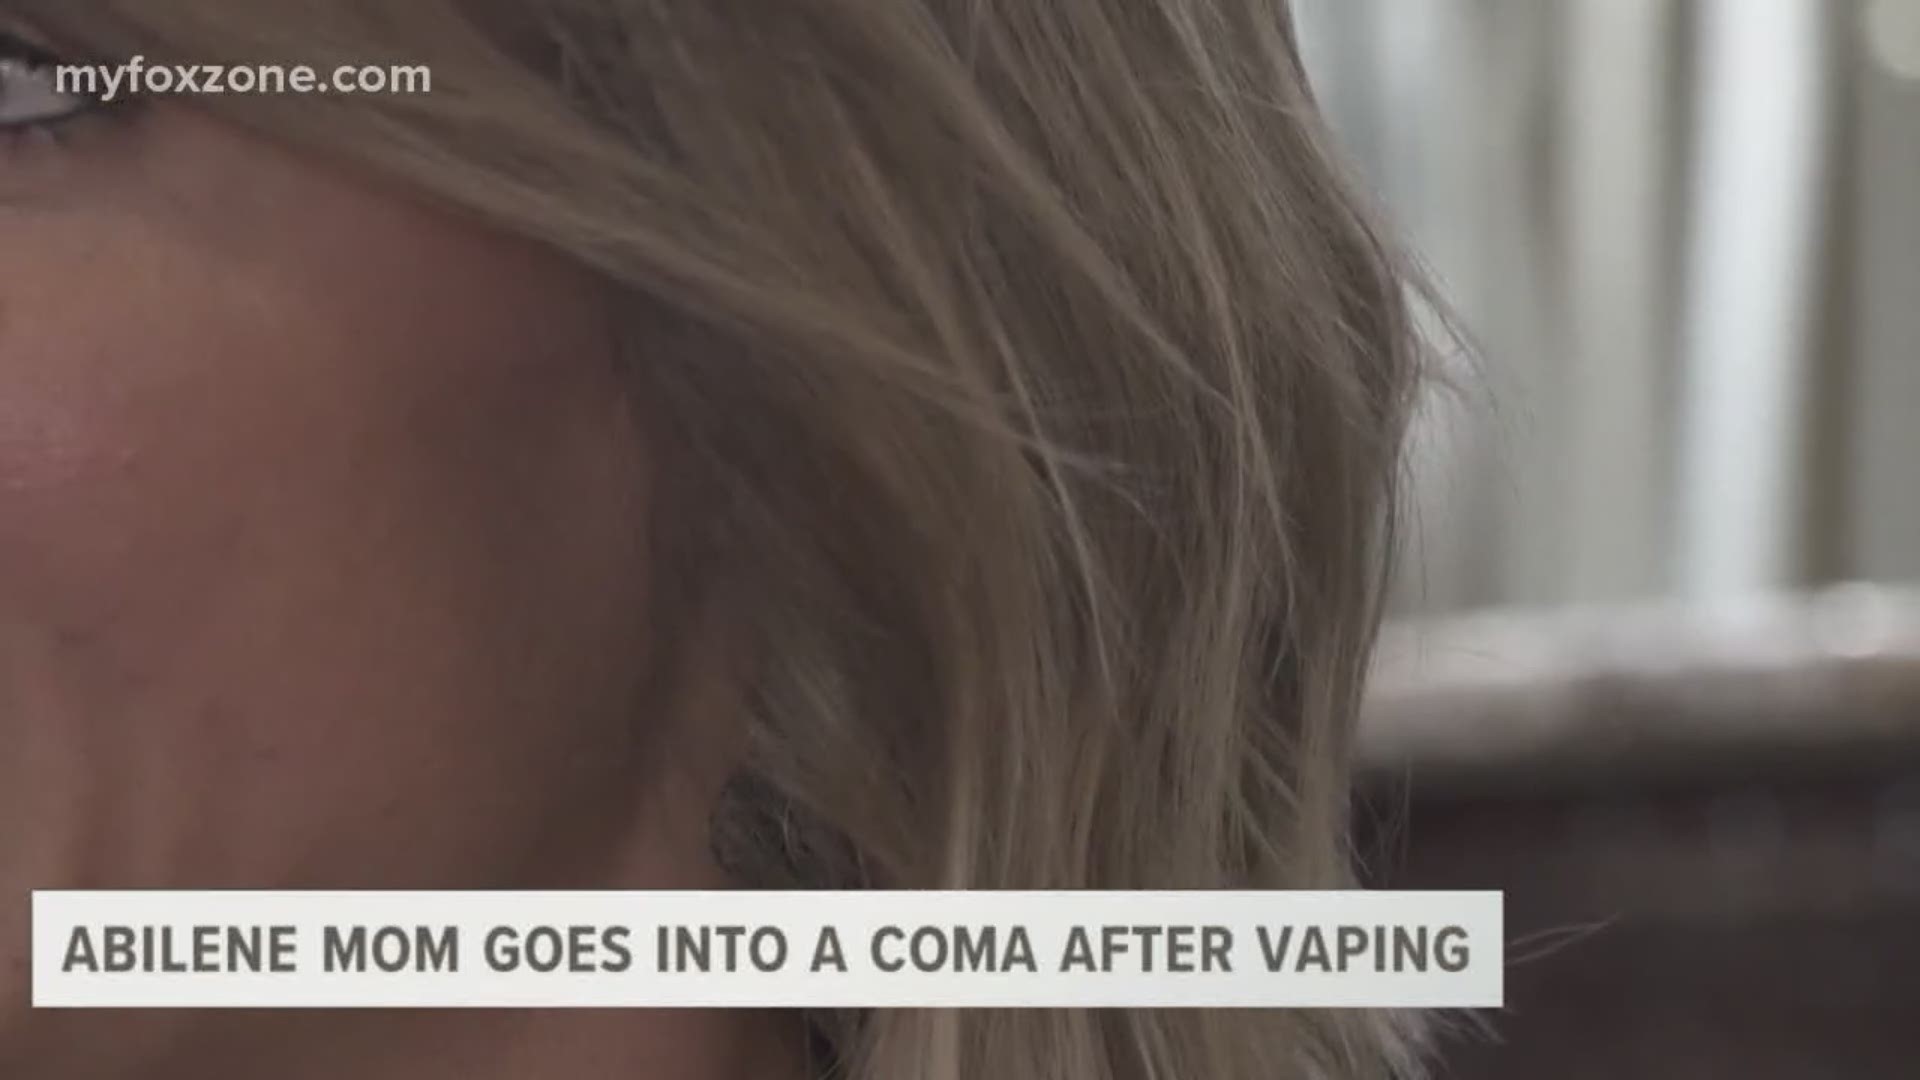 After three years of vaping, one west Texas mother shares her story of the critical condition she went through since vaping.